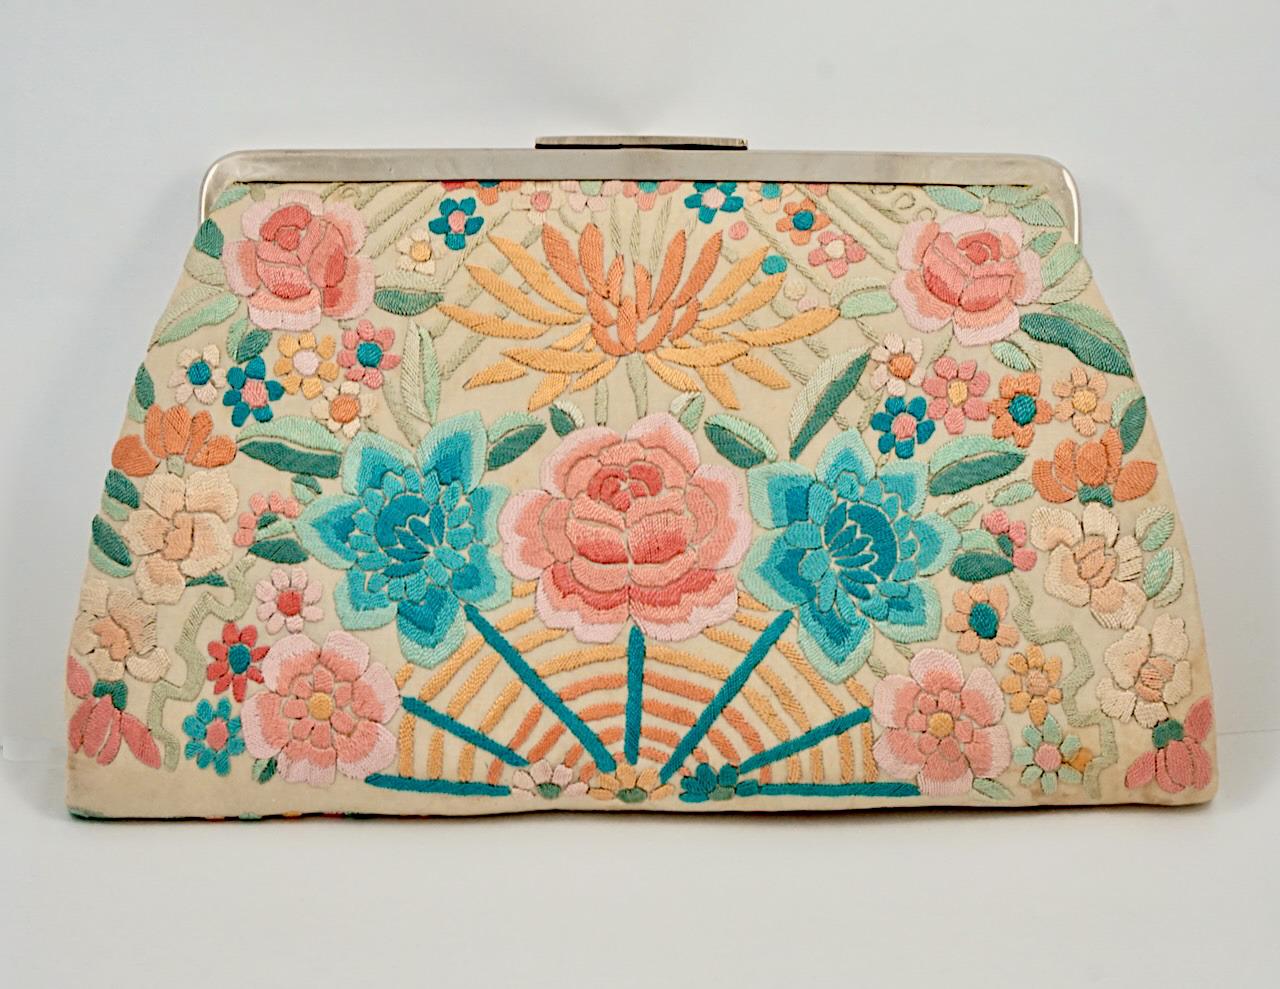 Silk clutch bag with silver tone fittings, and featuring lovely floral embroidery to both sides. Measuring width at the base 22.7 cm / 8.9 inches by height 13.3 cm / 5.2 inches. Inside there is a silk lining with two pockets, and a purse with two